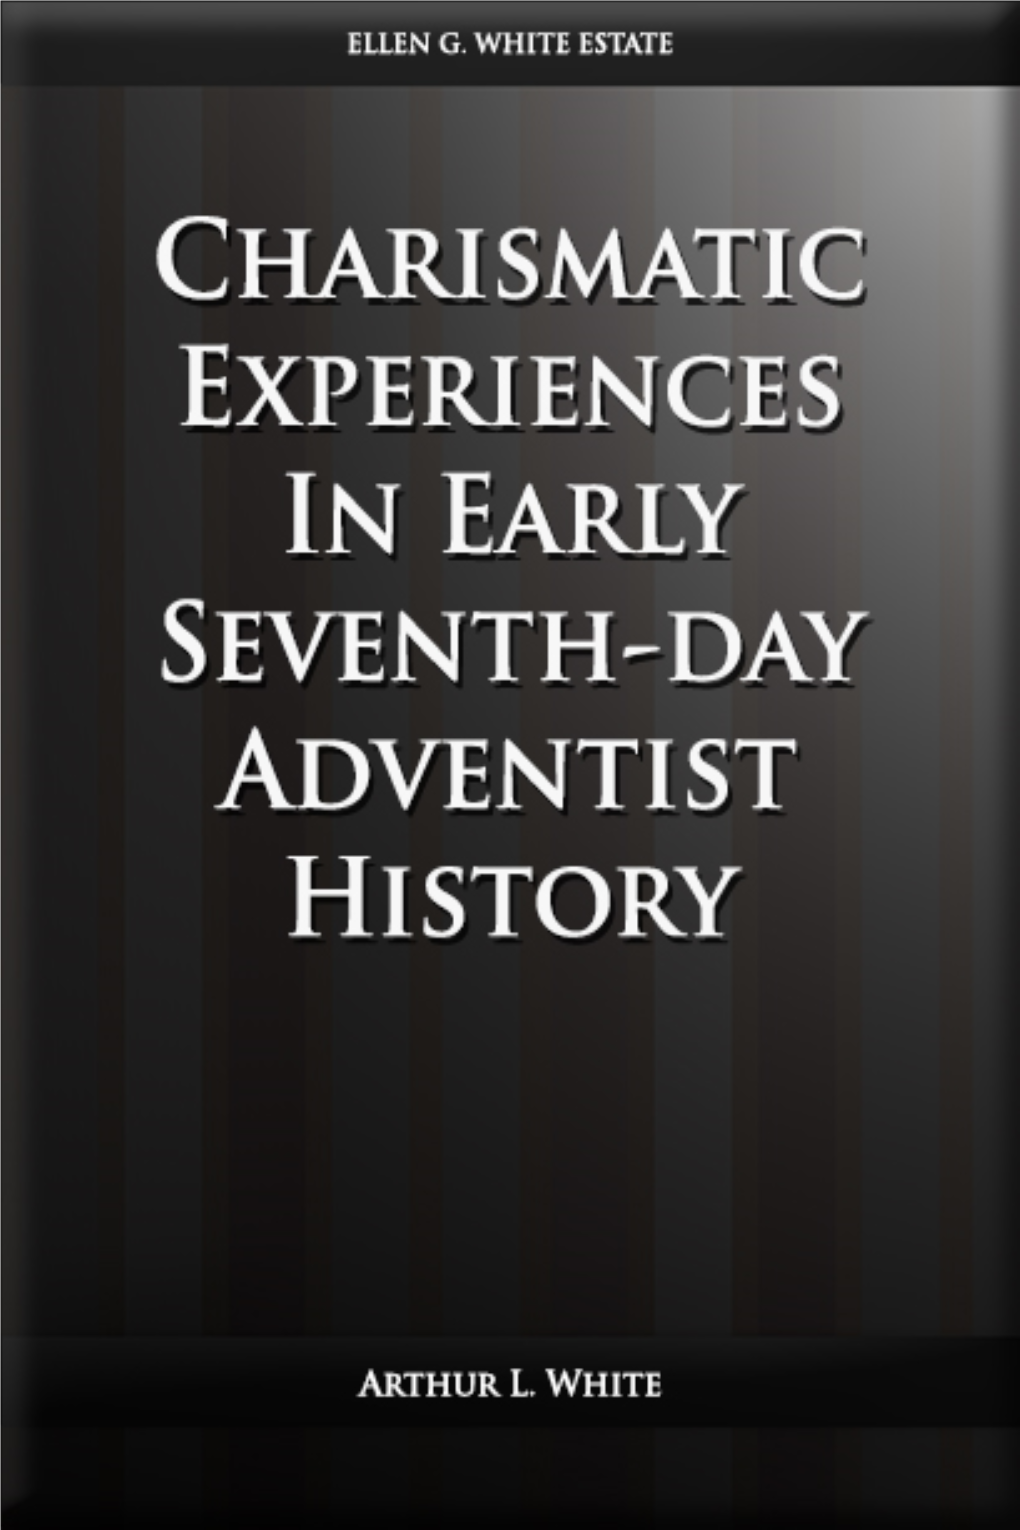 Charismatic Experiences in Early Seventh-Day Adventist History